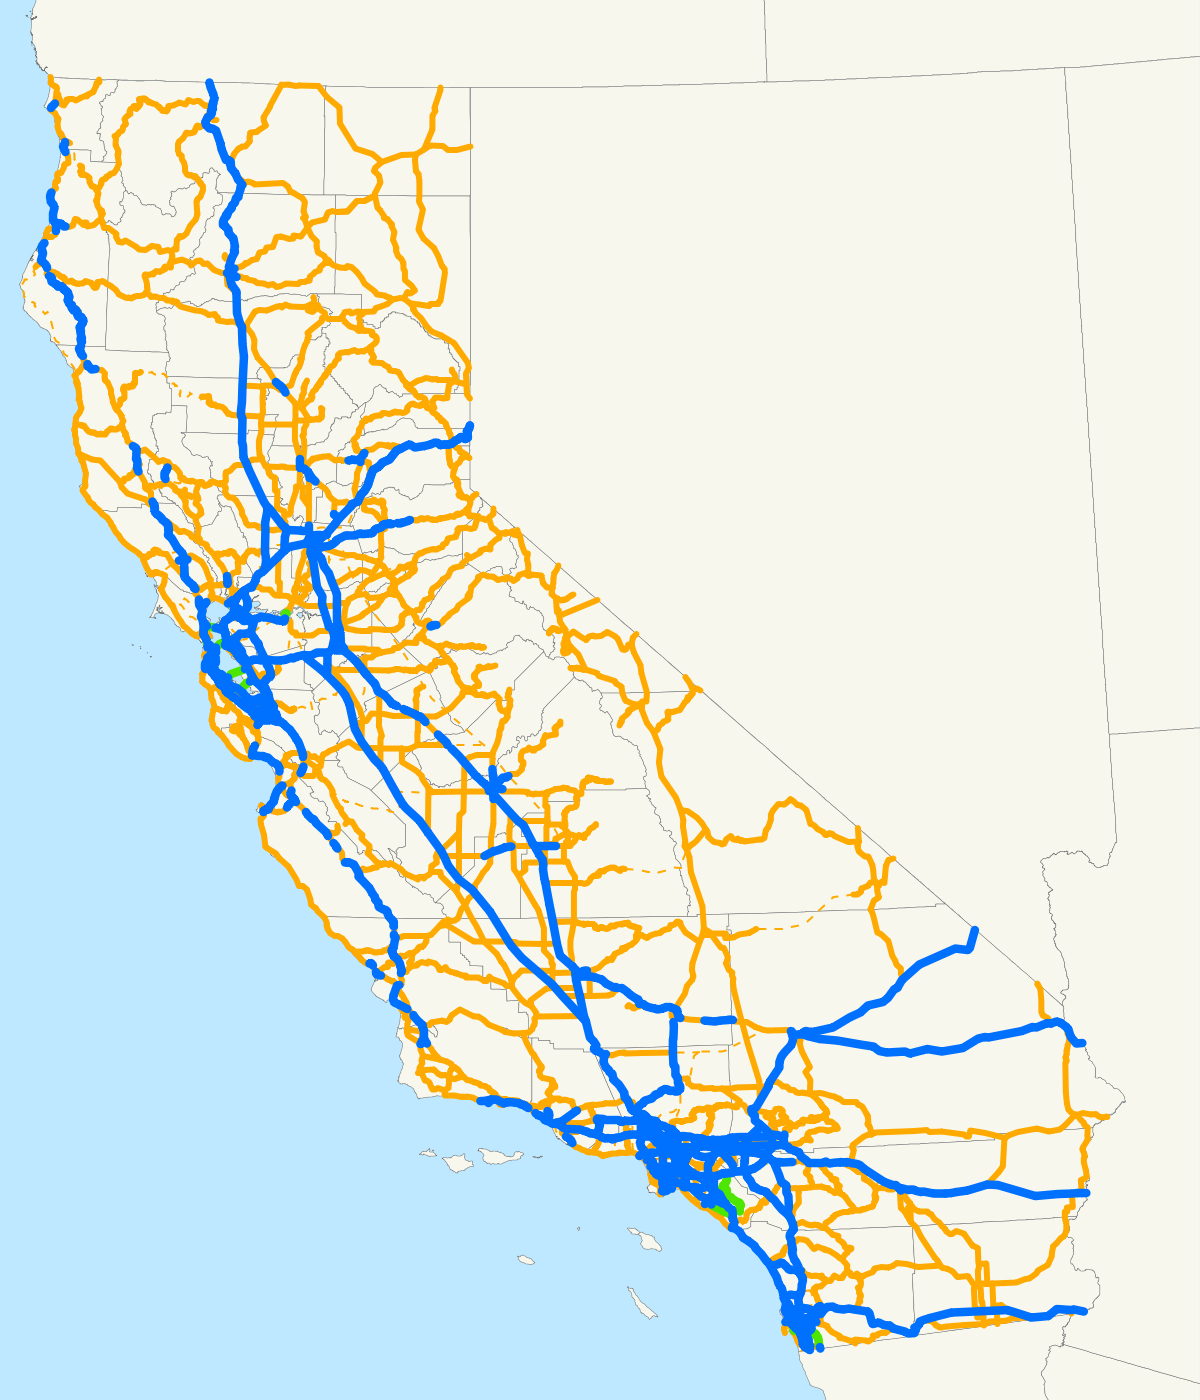 State Highways In California - Wikipedia - Map Of California Highways And Freeways